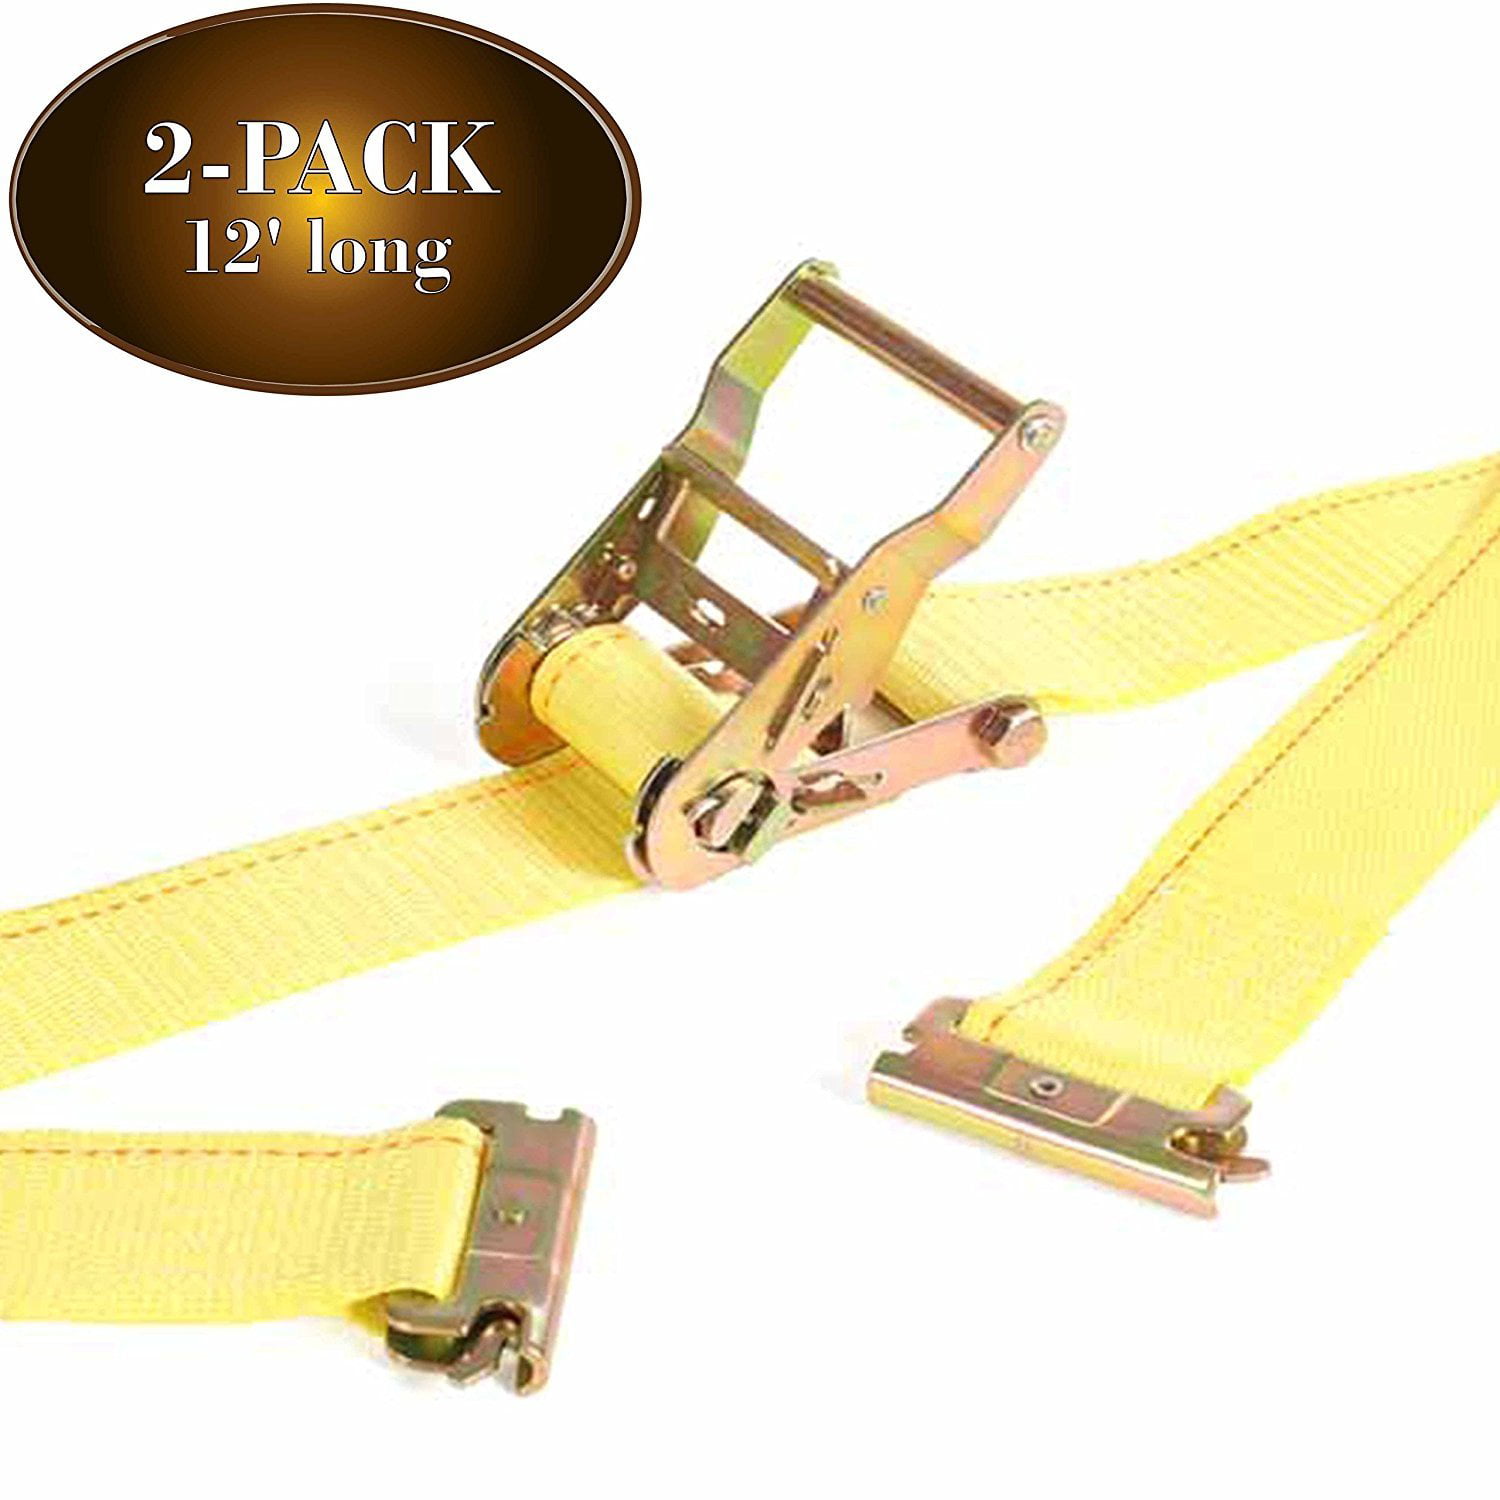 by DC Cargo Mall Tie Down Motorcycle 2 x 12 Heavy Duty Yellow Polyester Tie-Down Straps 2 Strong Ratchet Trailer Load ETrack Spring Fittings 2Pk E Track Ratcheting Straps Cargo TieDowns